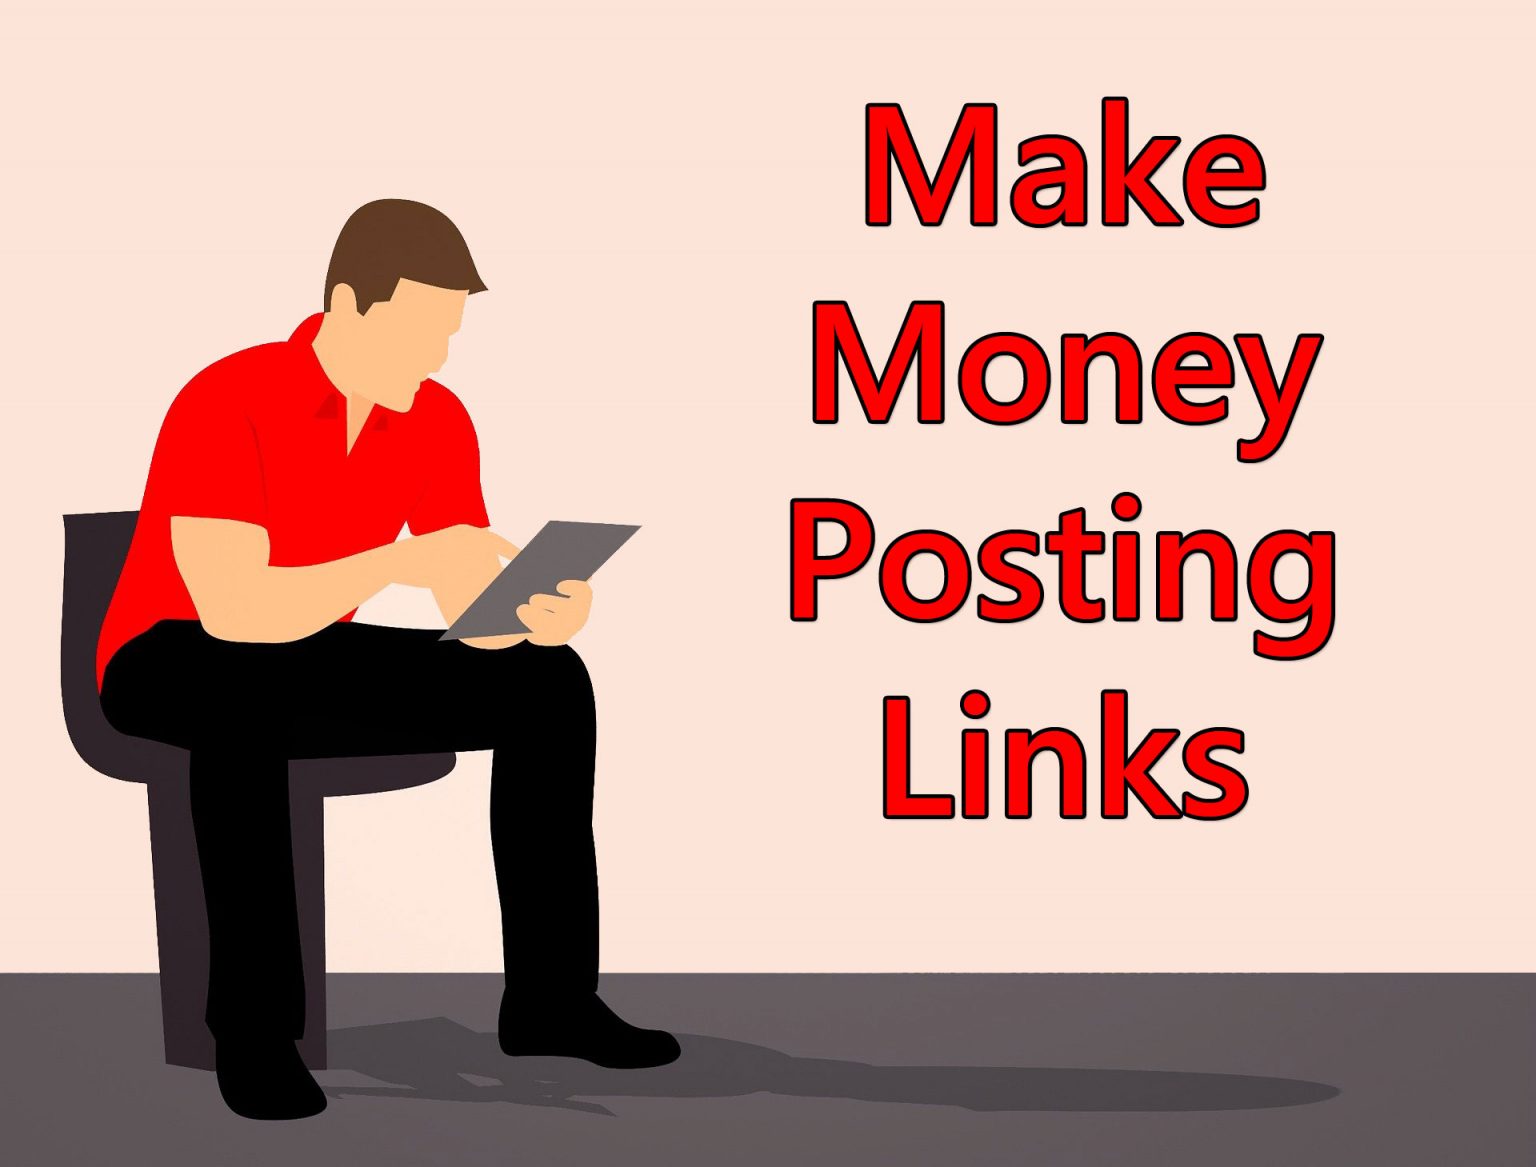 Can You Really Make Money Posting Links For Companies Online? (My